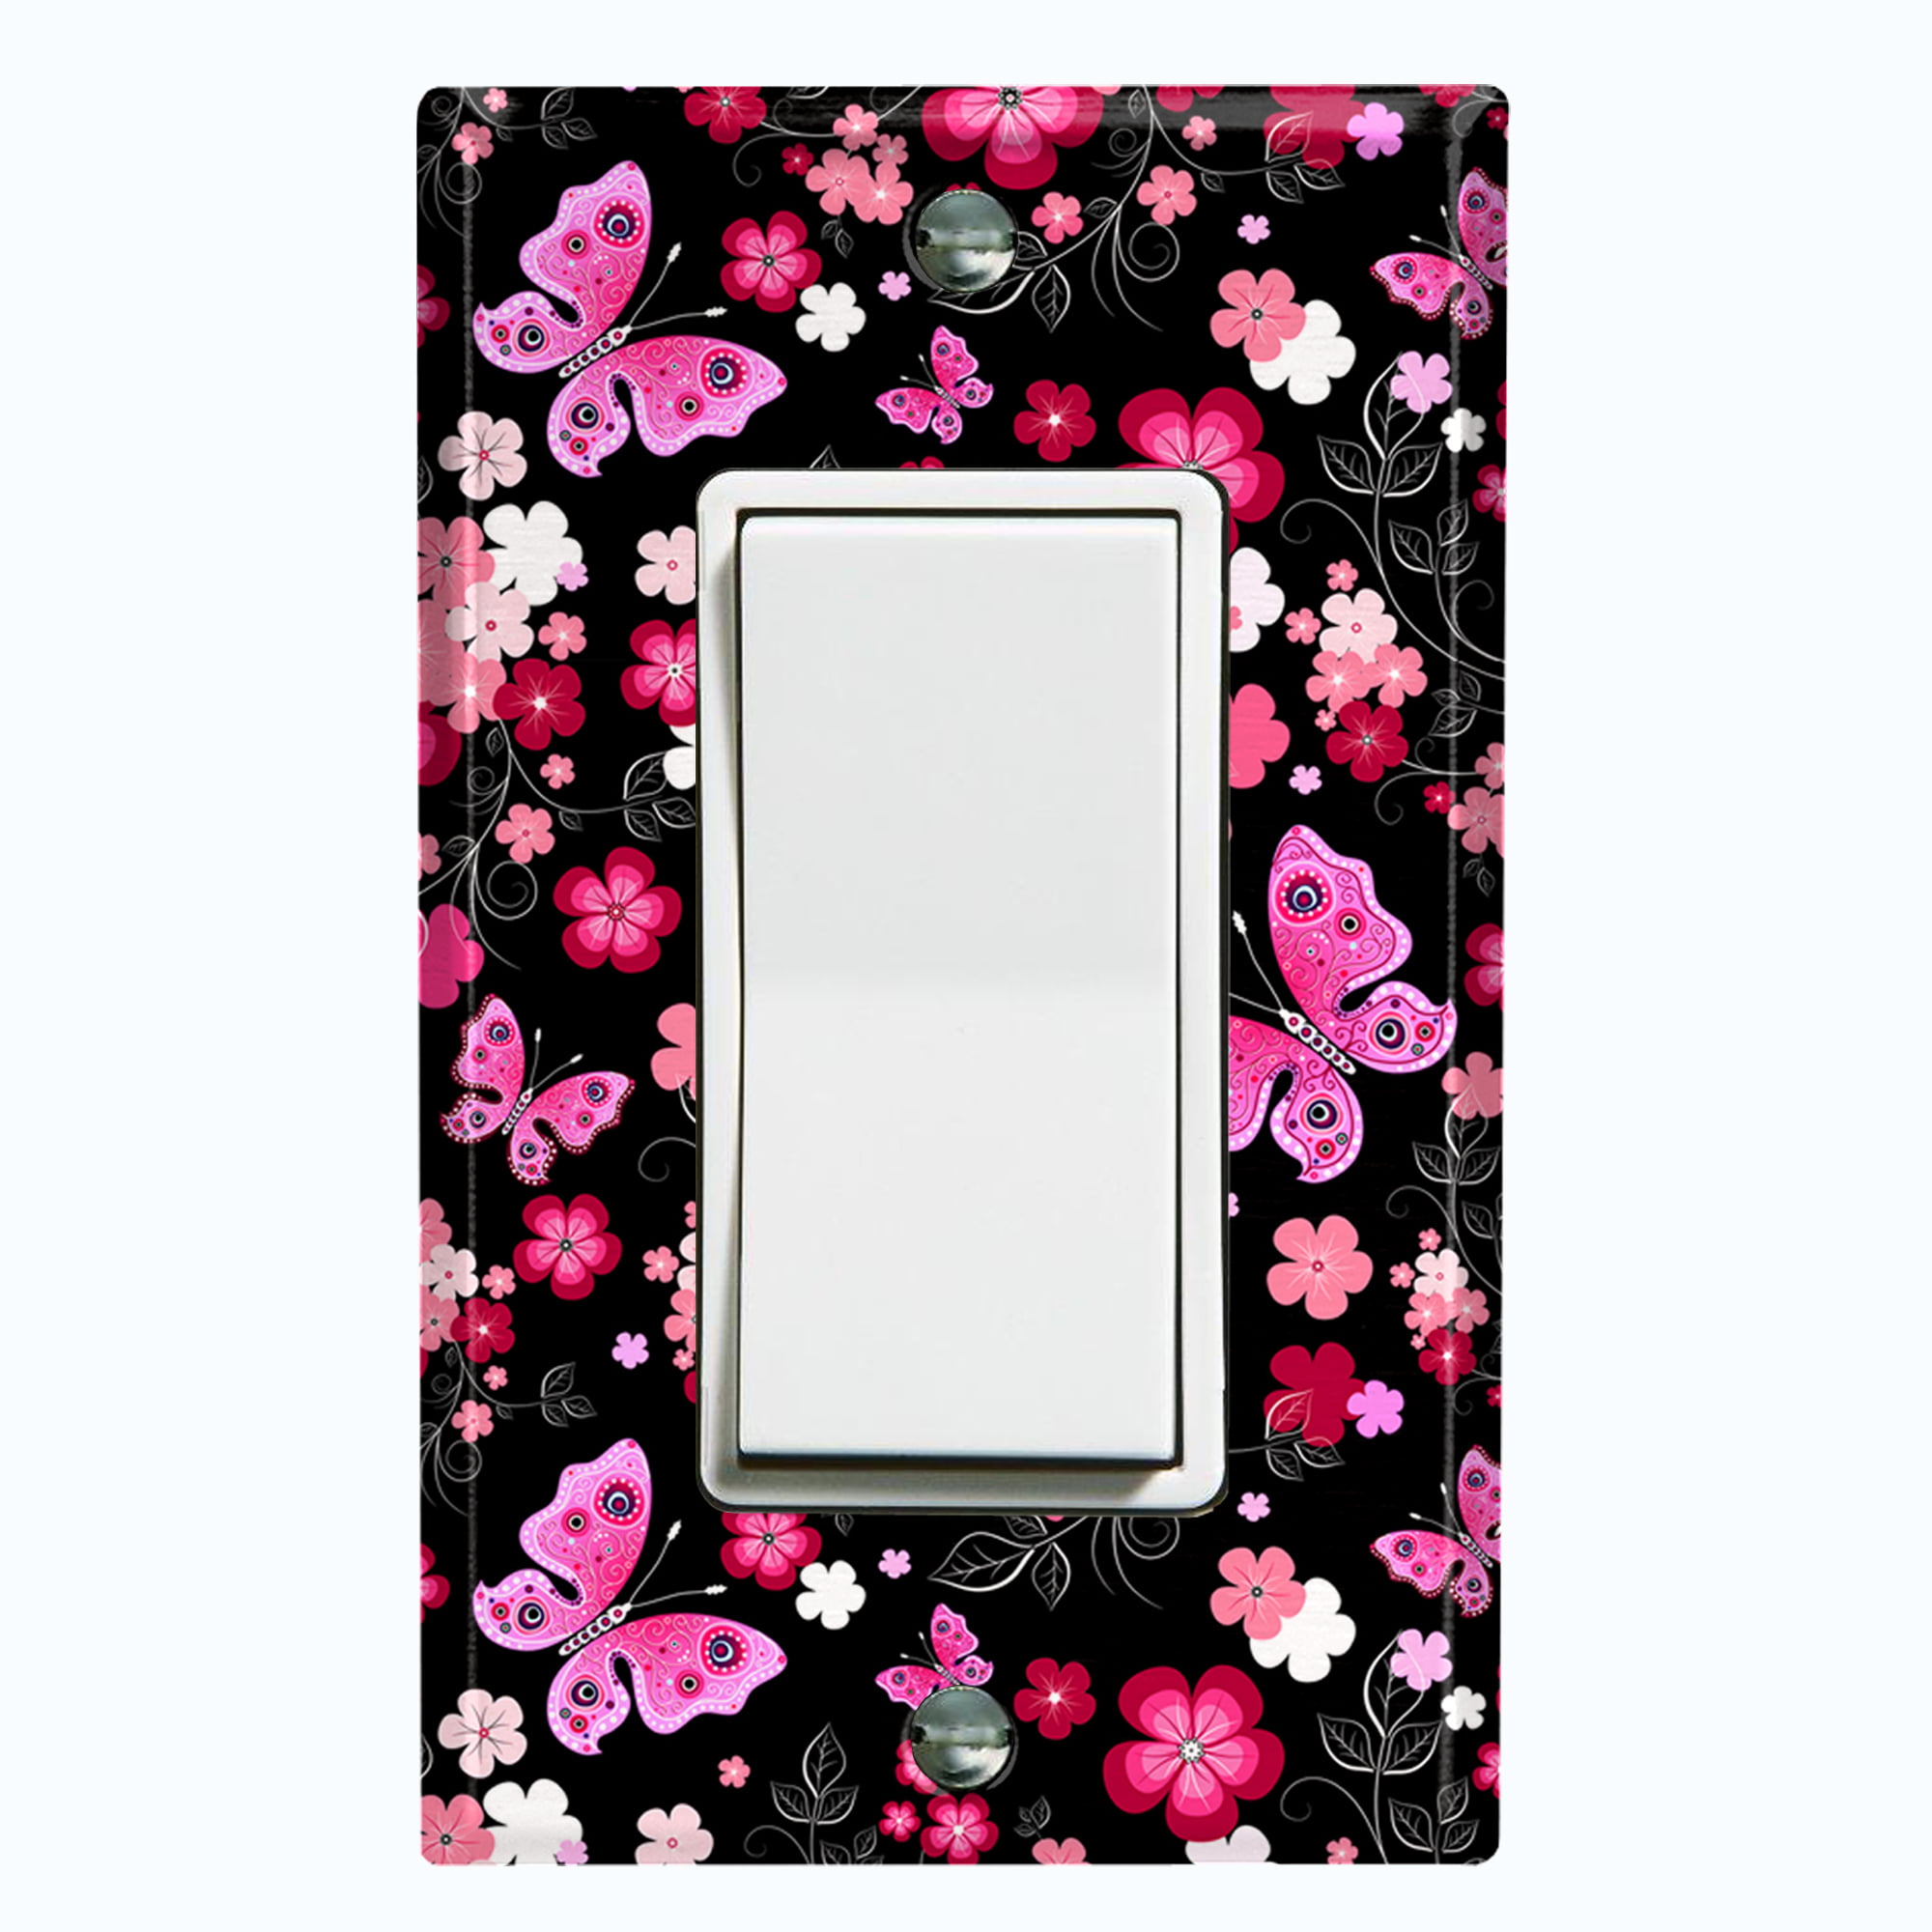 PINK BUTTERFLIES THEME LIGHT SWITCH OUTLET WALL PLATE BEDROOM ROOM HOME NY DECOR